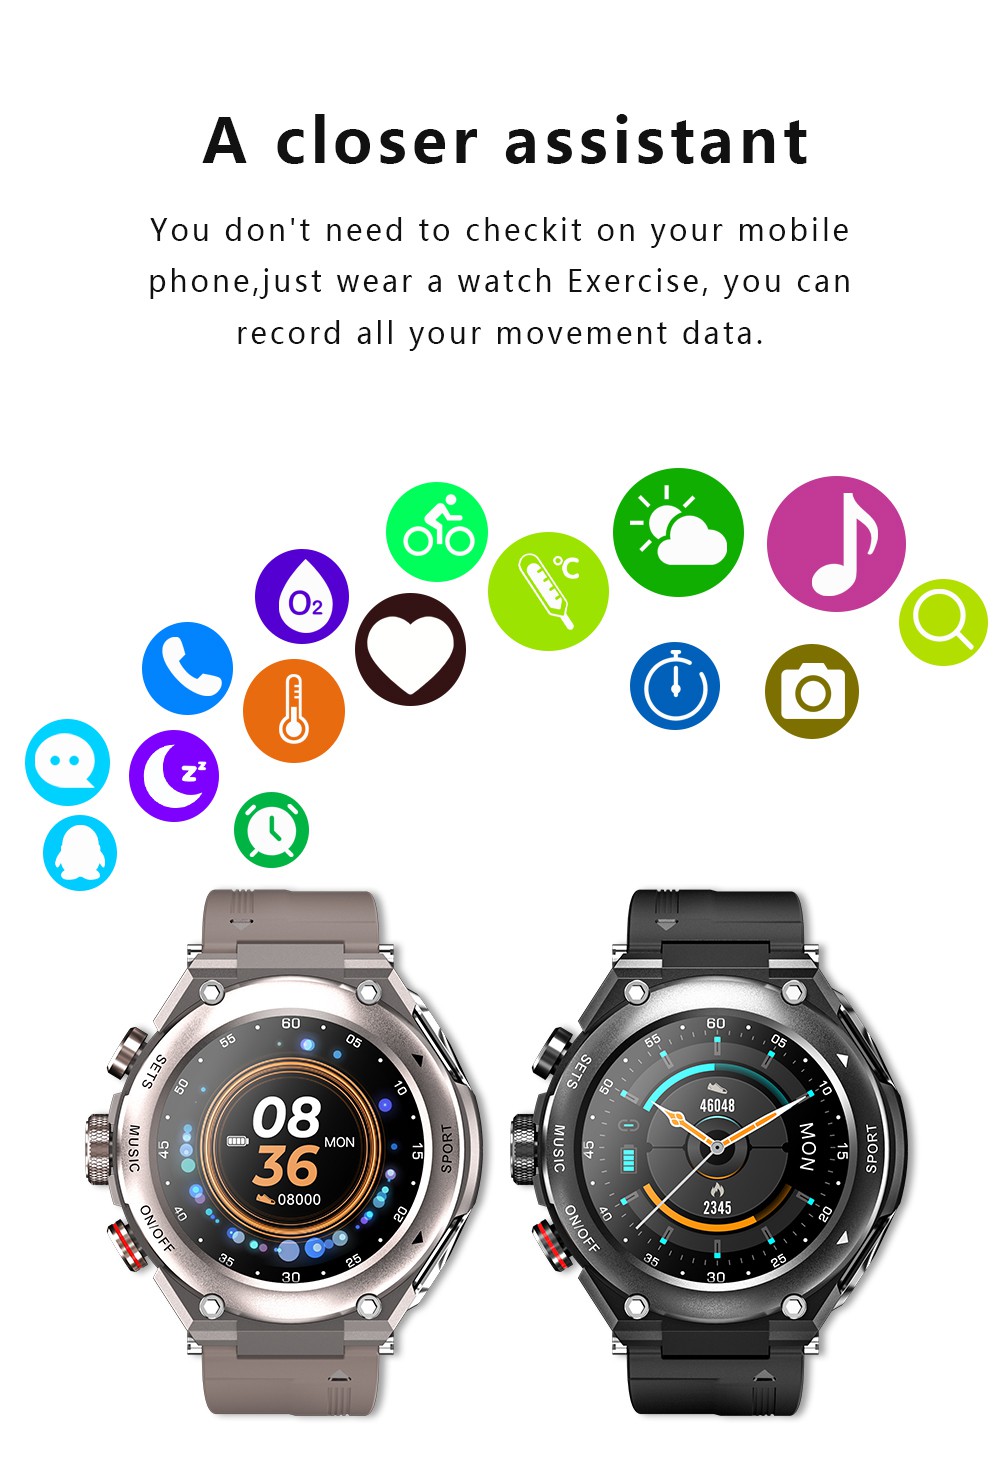 LEMFO T92 Smartwatch 1.28-inch IPS Color Full-Touch Screen Sports Watch with BT Earbuds - Black